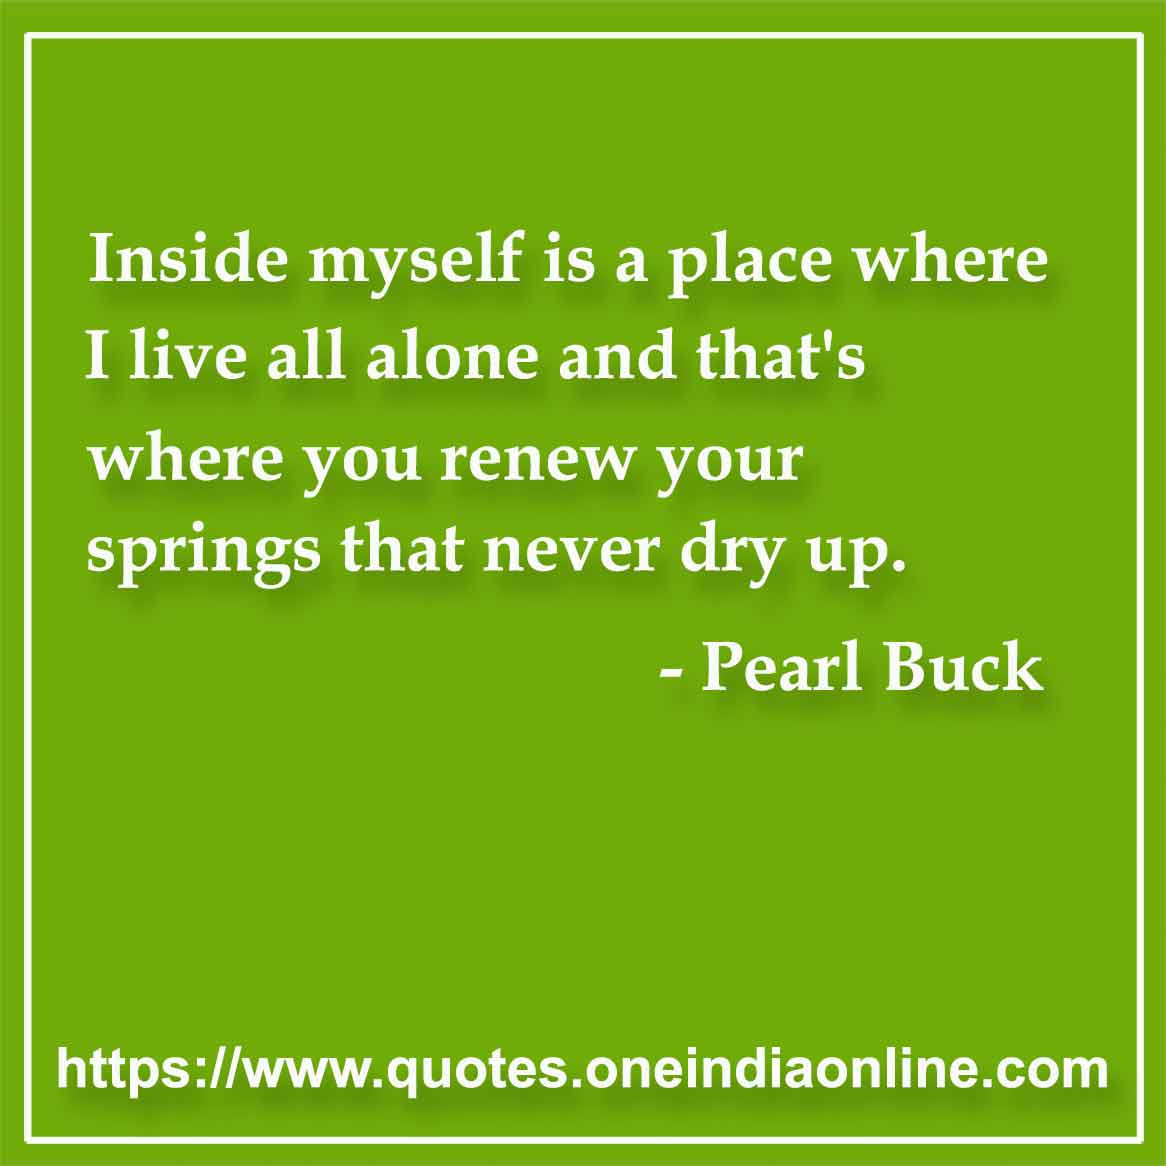 Inside myself is a place where I live all alone and that's where you renew your springs that never dry up.

- Loneliness Quotes by Pearl Buck 